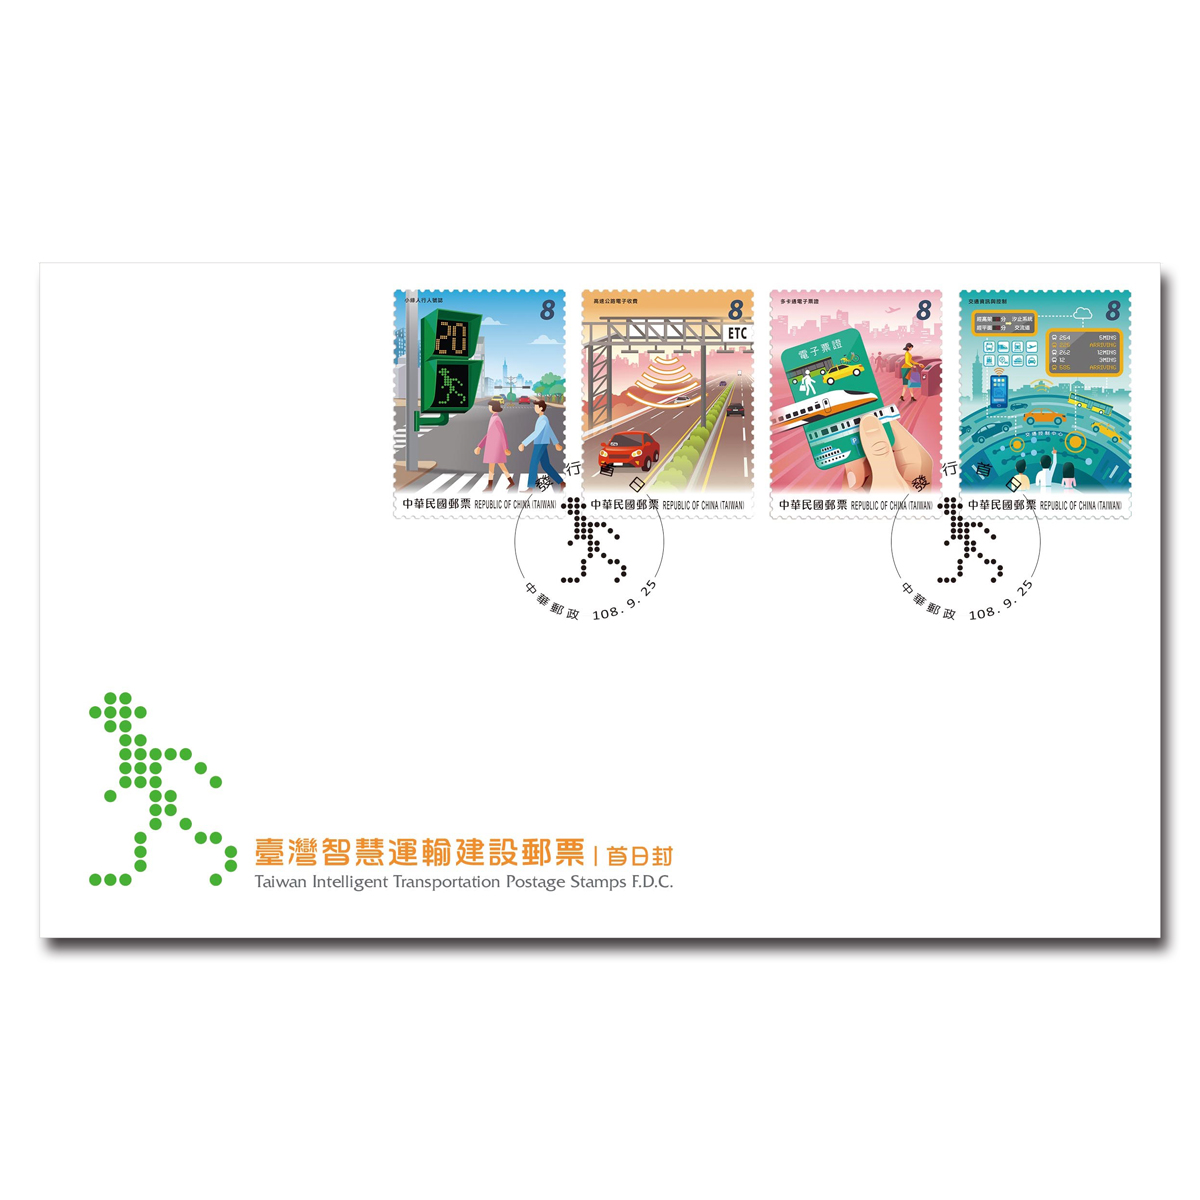 Taiwan Intelligent Transportation Postage Stamps Pre-cancelled FDC affixed with a complete set of stamps